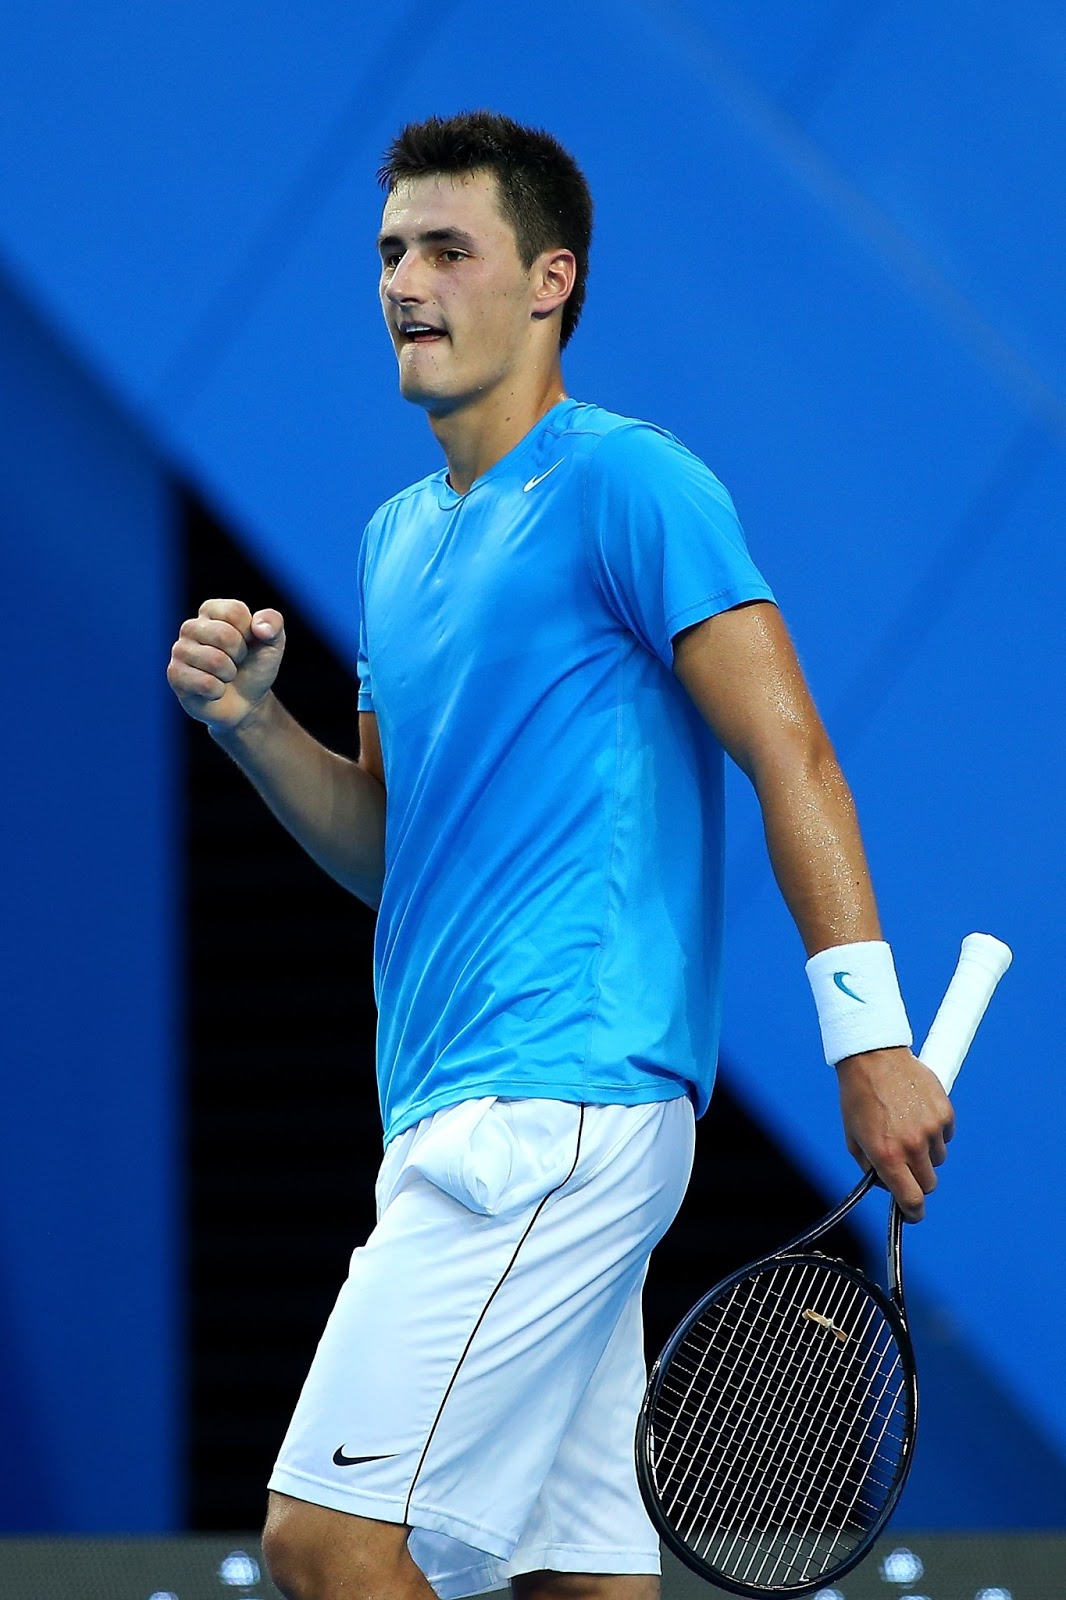 All About Sports: Bernard Tomic Profile, Biography, Pictures And Wallpapers